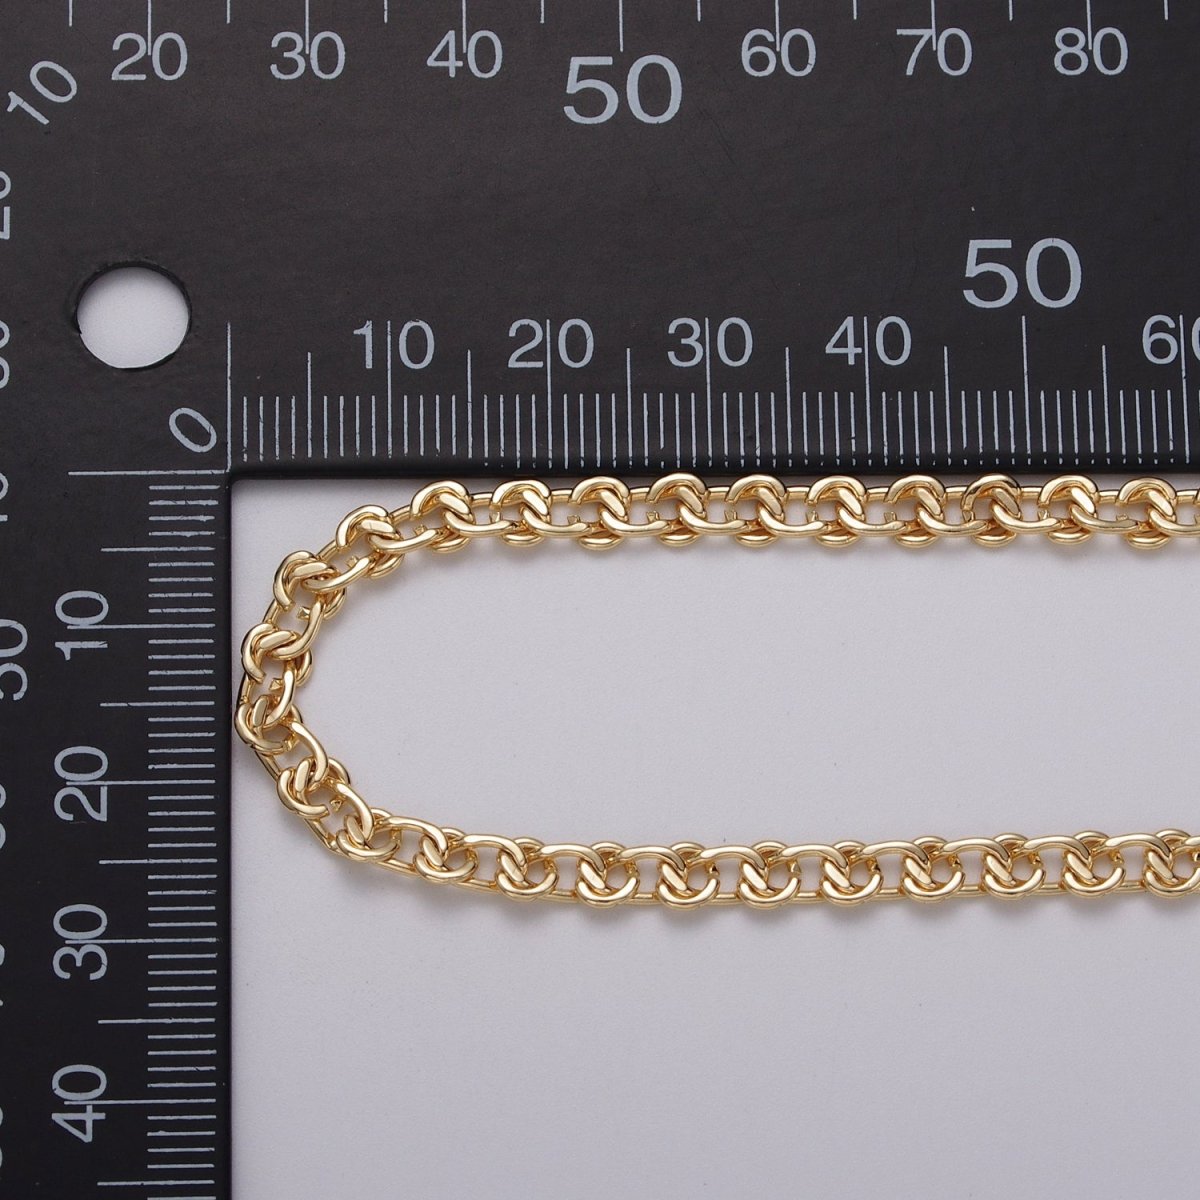 16k Gold Filled Cable Chain 4.7mm Width 16k Gold Filled Unique Unfinished Chain by Yard | ROLL-1344 Clearance Pricing - DLUXCA